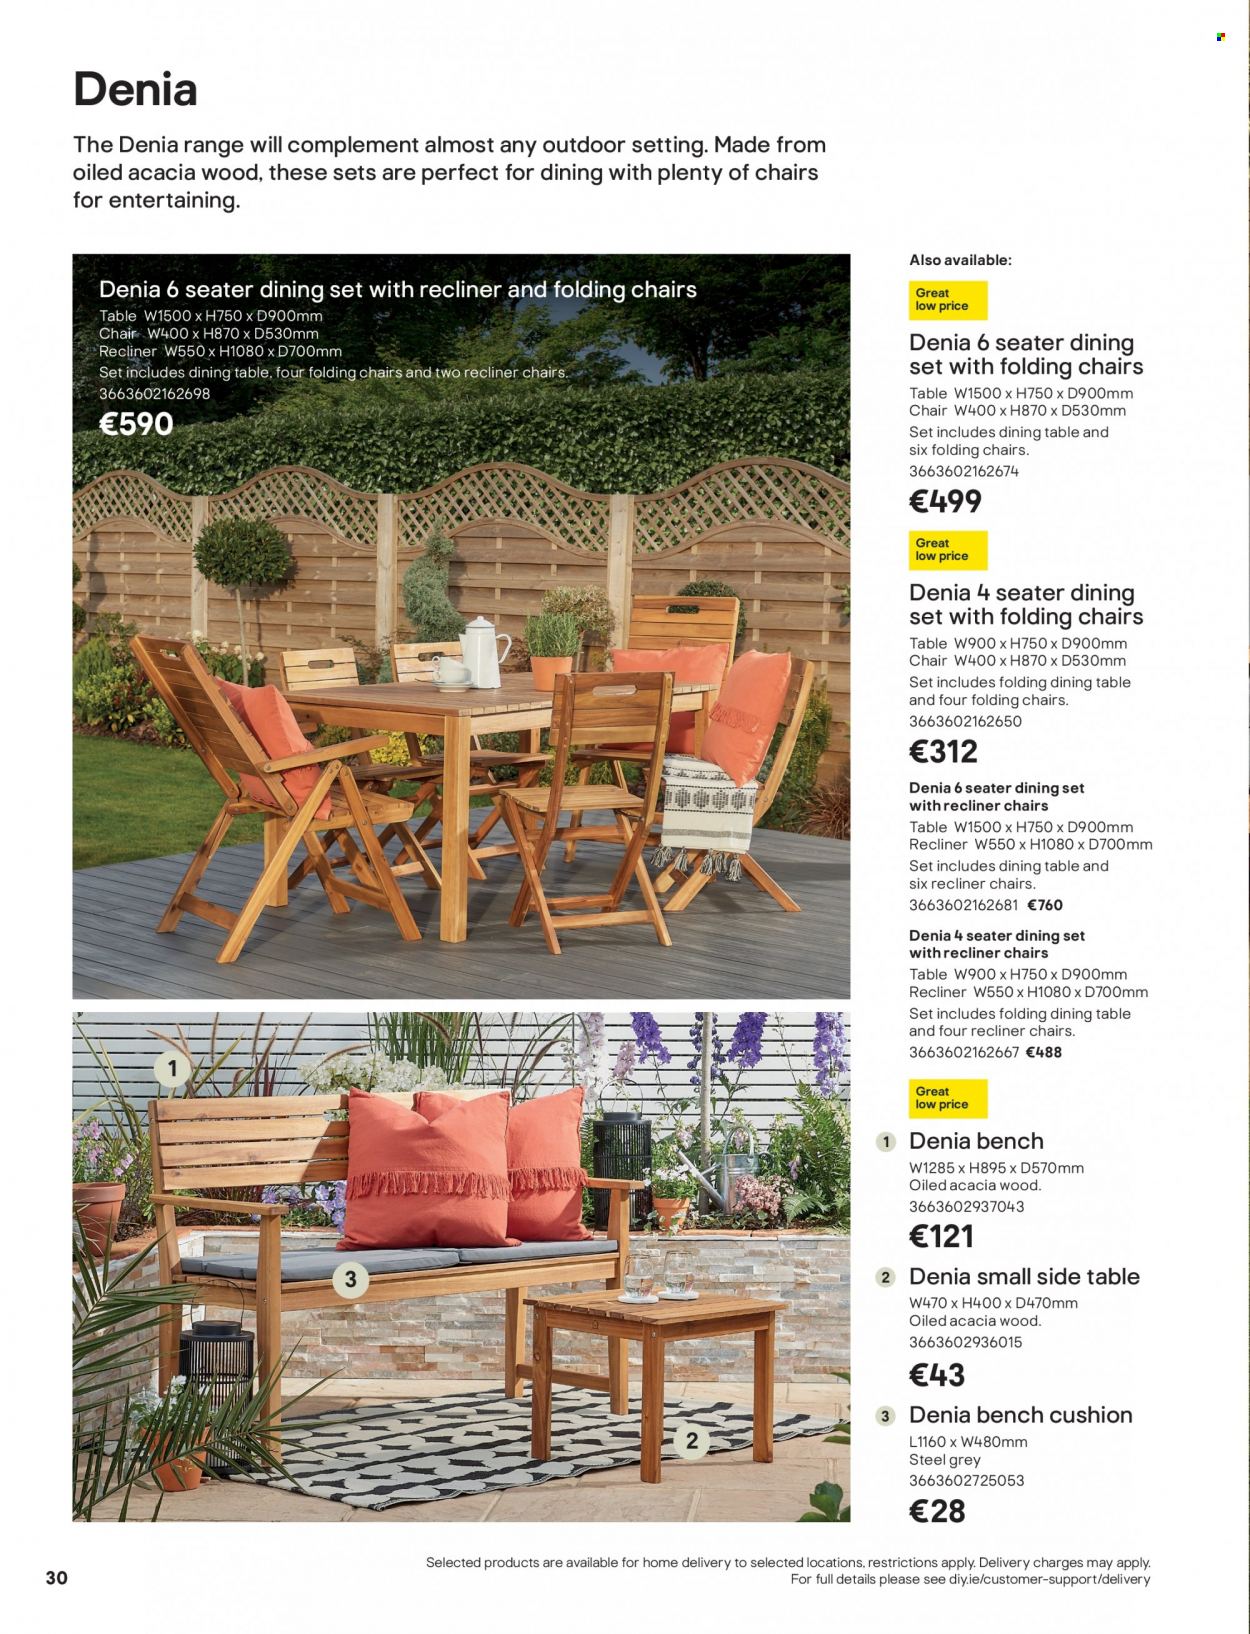 thumbnail - B&Q offer  - Sales products - dining set, dining table, table, chair, bench, recliner chair, sidetable, cushion, bench cushion. Page 30.